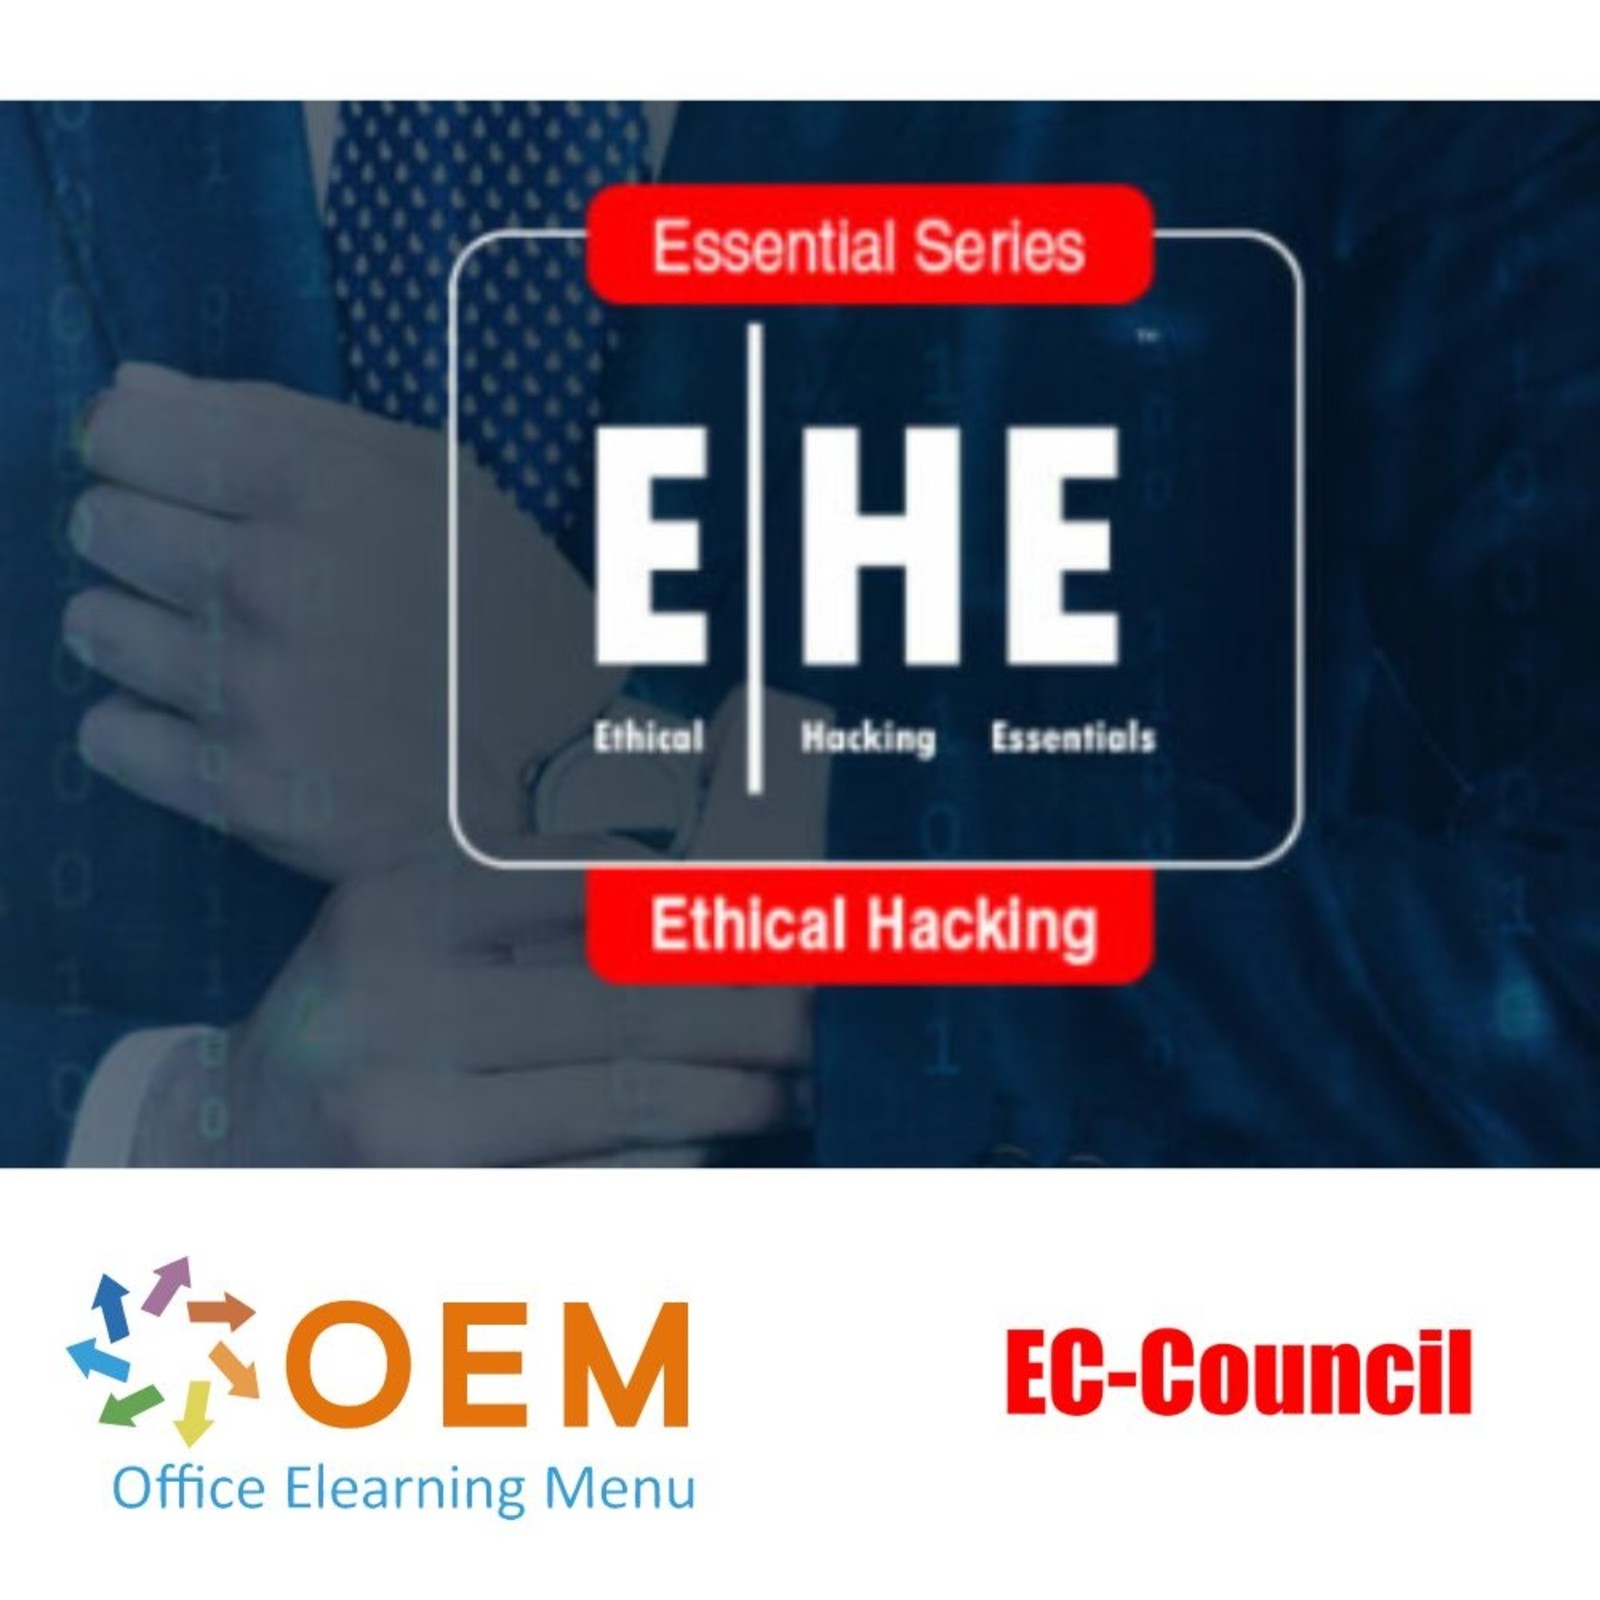 EC-Council Ethical Hacking Essentials (EHE) Training